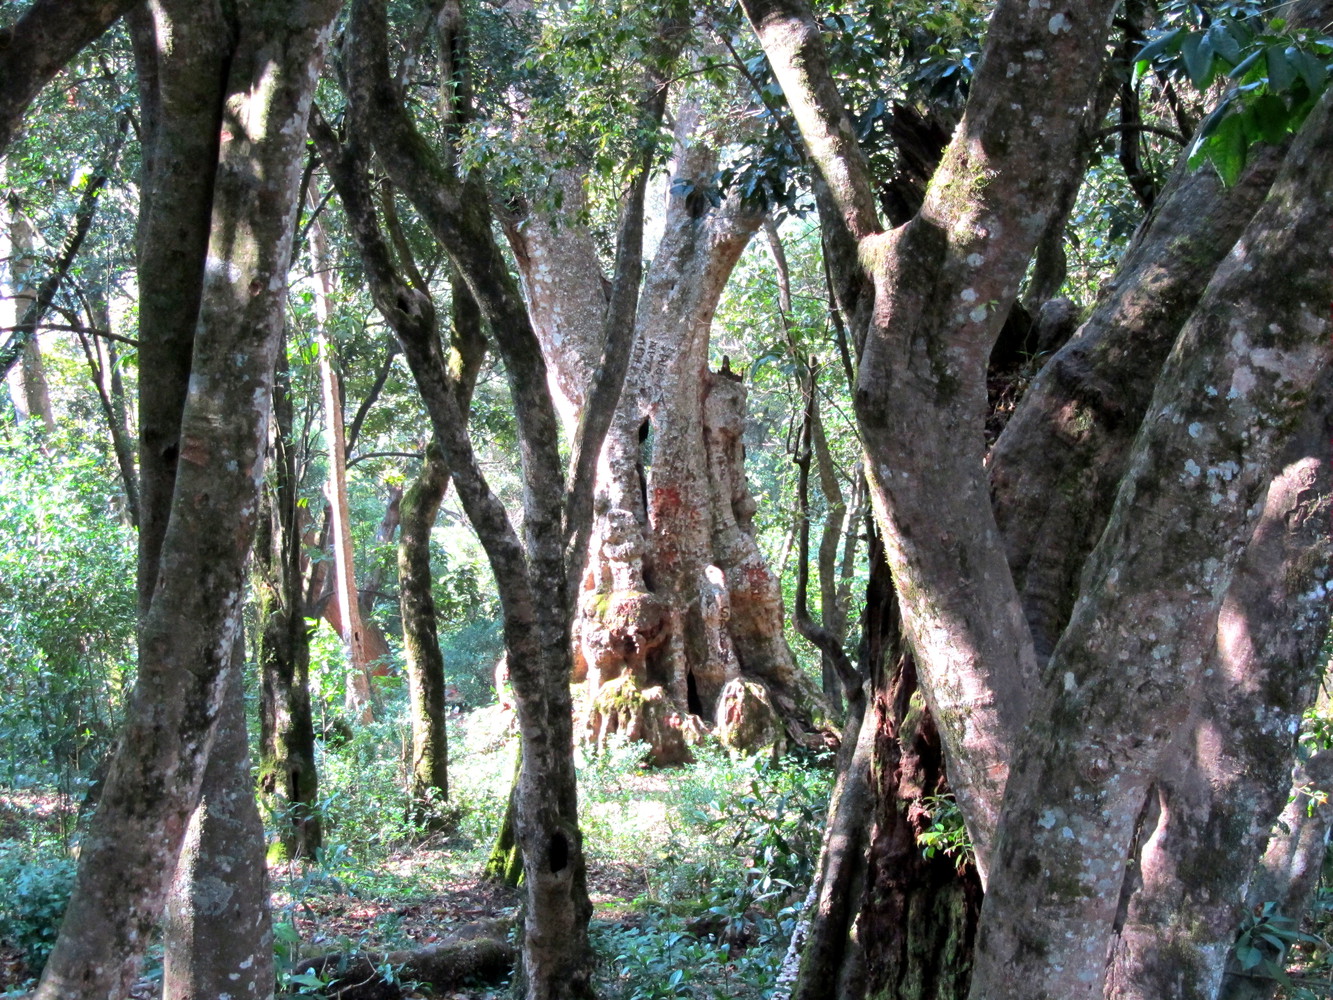 A broad tree at the centre surrounded by several trees in a forest